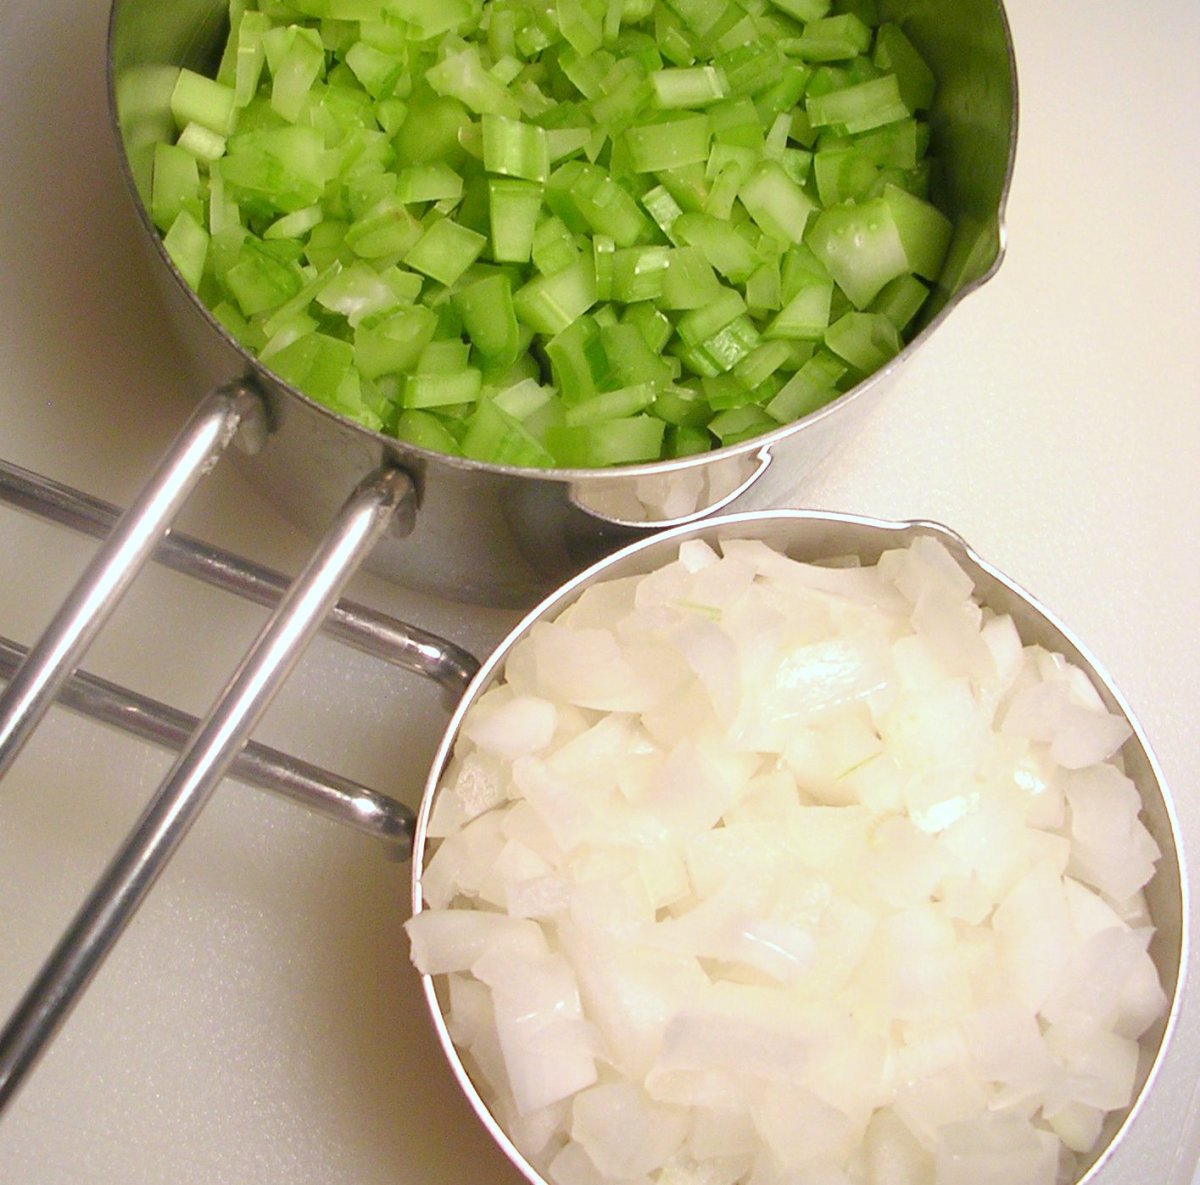 Finely diced celery and onion.